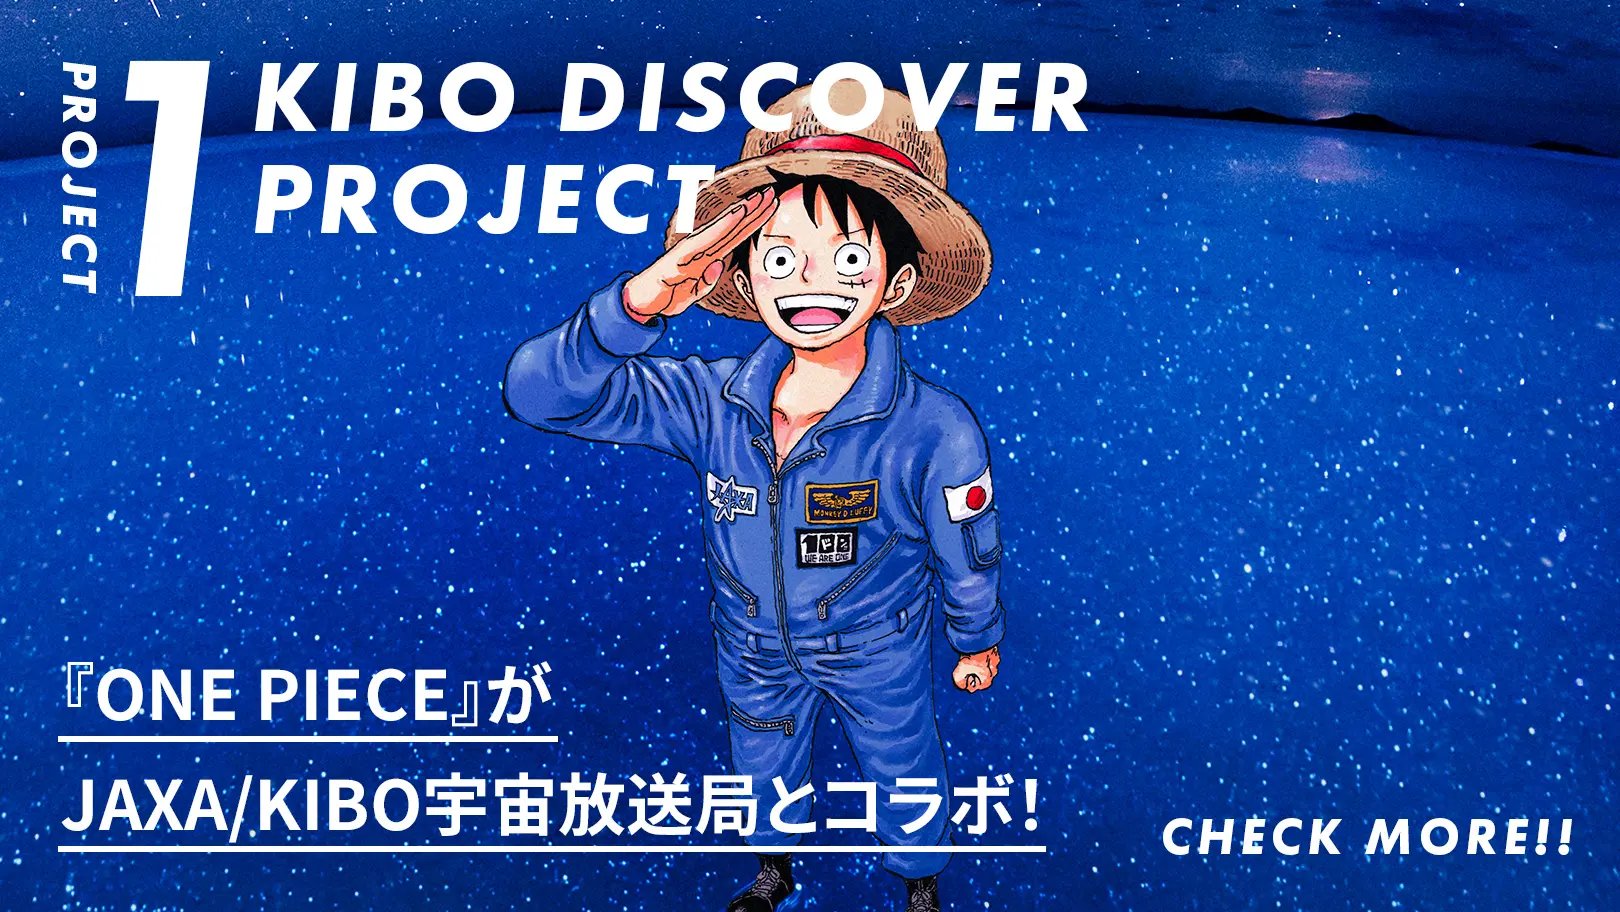 A 'One Piece' project